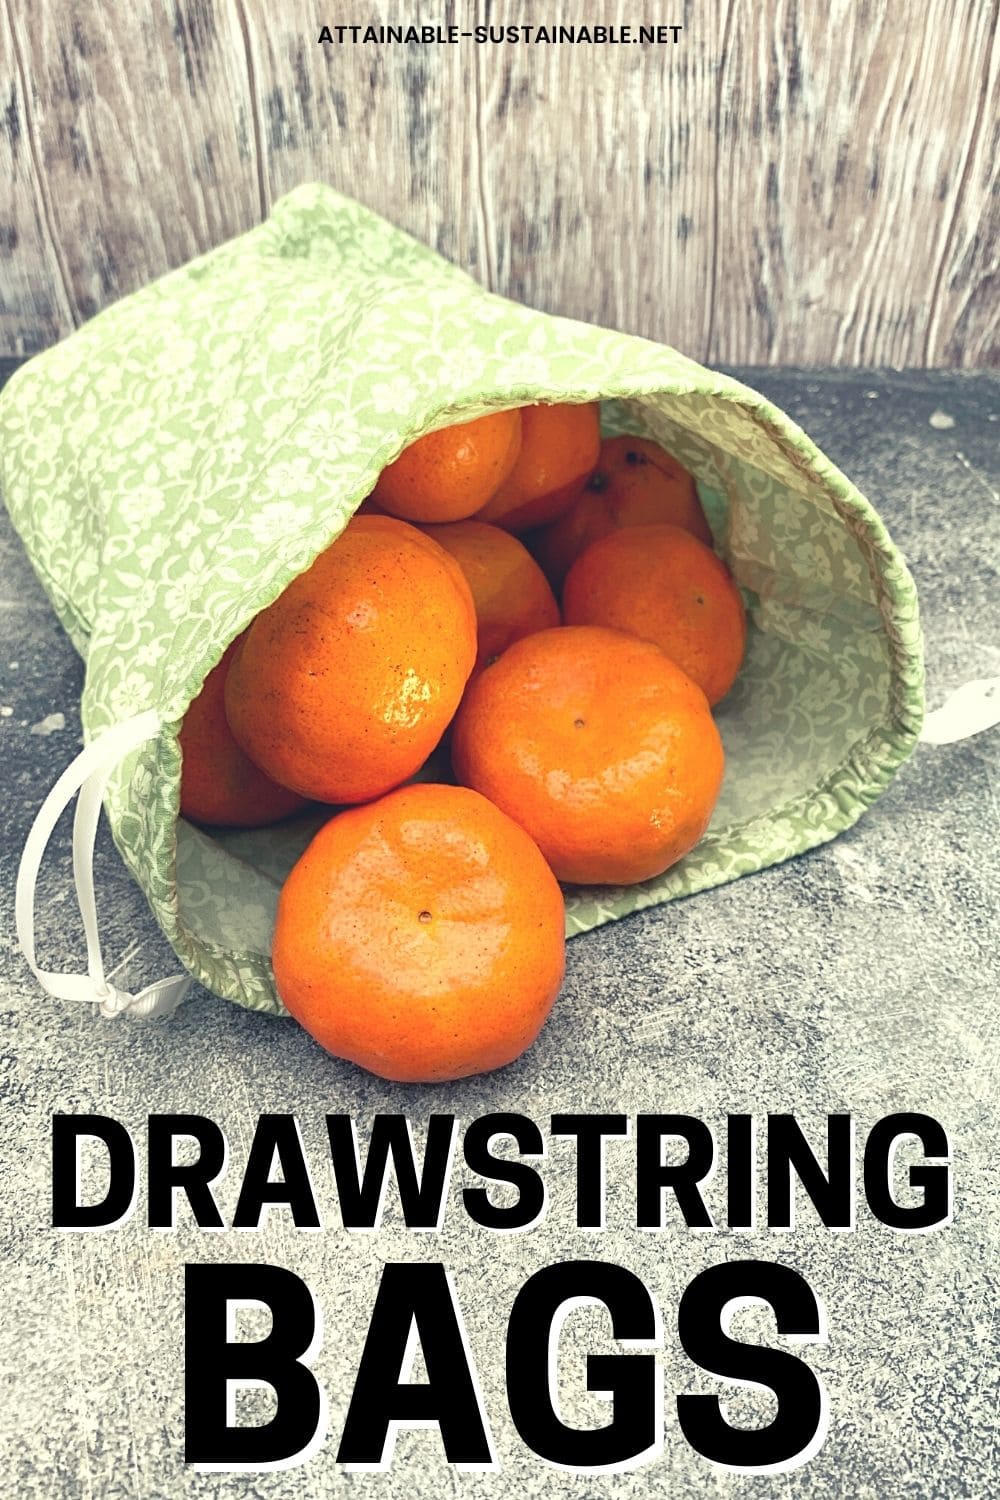 bright orange tangerines spilling out of a green drawstring bag.